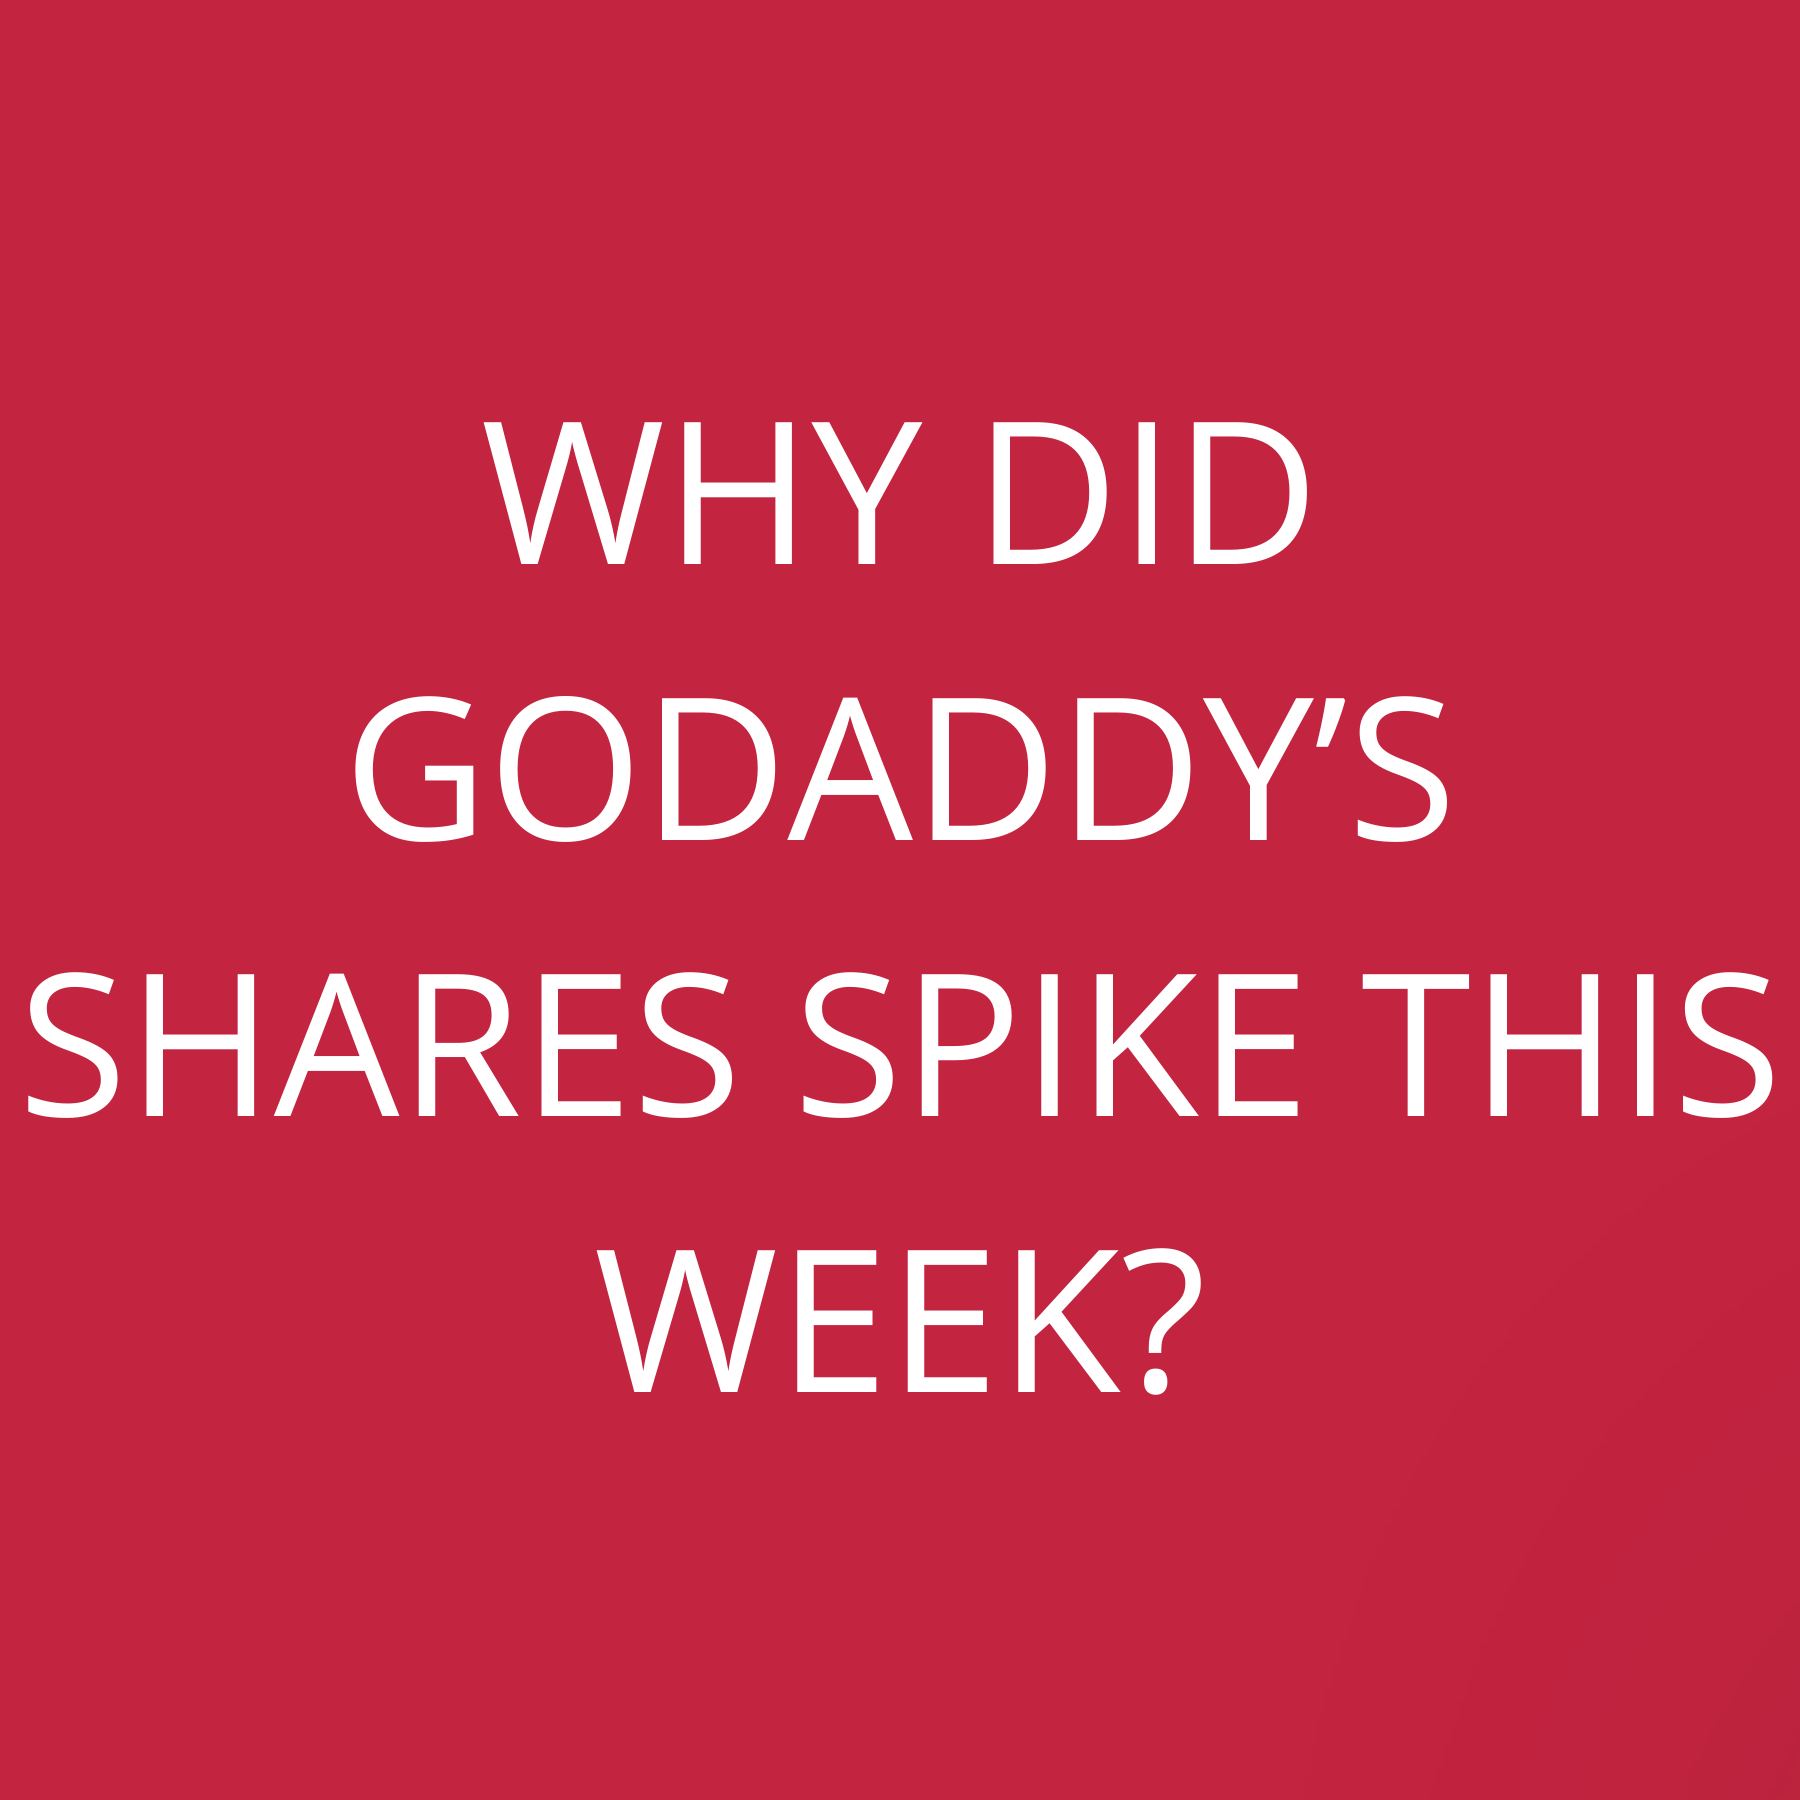 Why did GoDaddy’s shares spike this week?